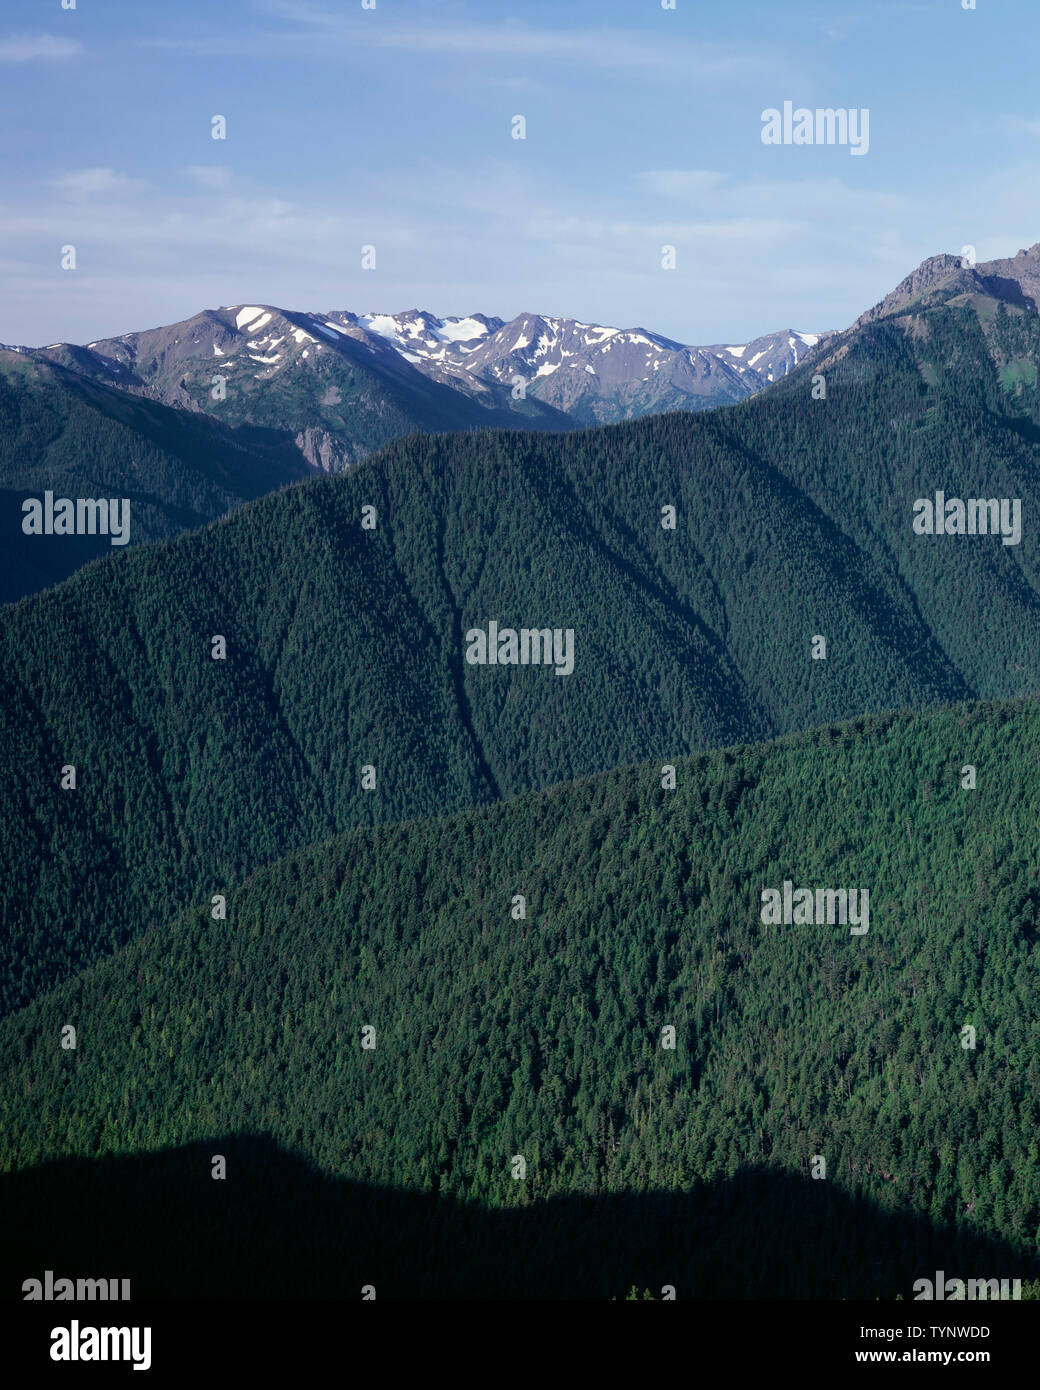 USA, Washington, Olympic National Park, Densely forested ridges and valleys beneath peaks of the eastern Olympic Mountains. Stock Photo